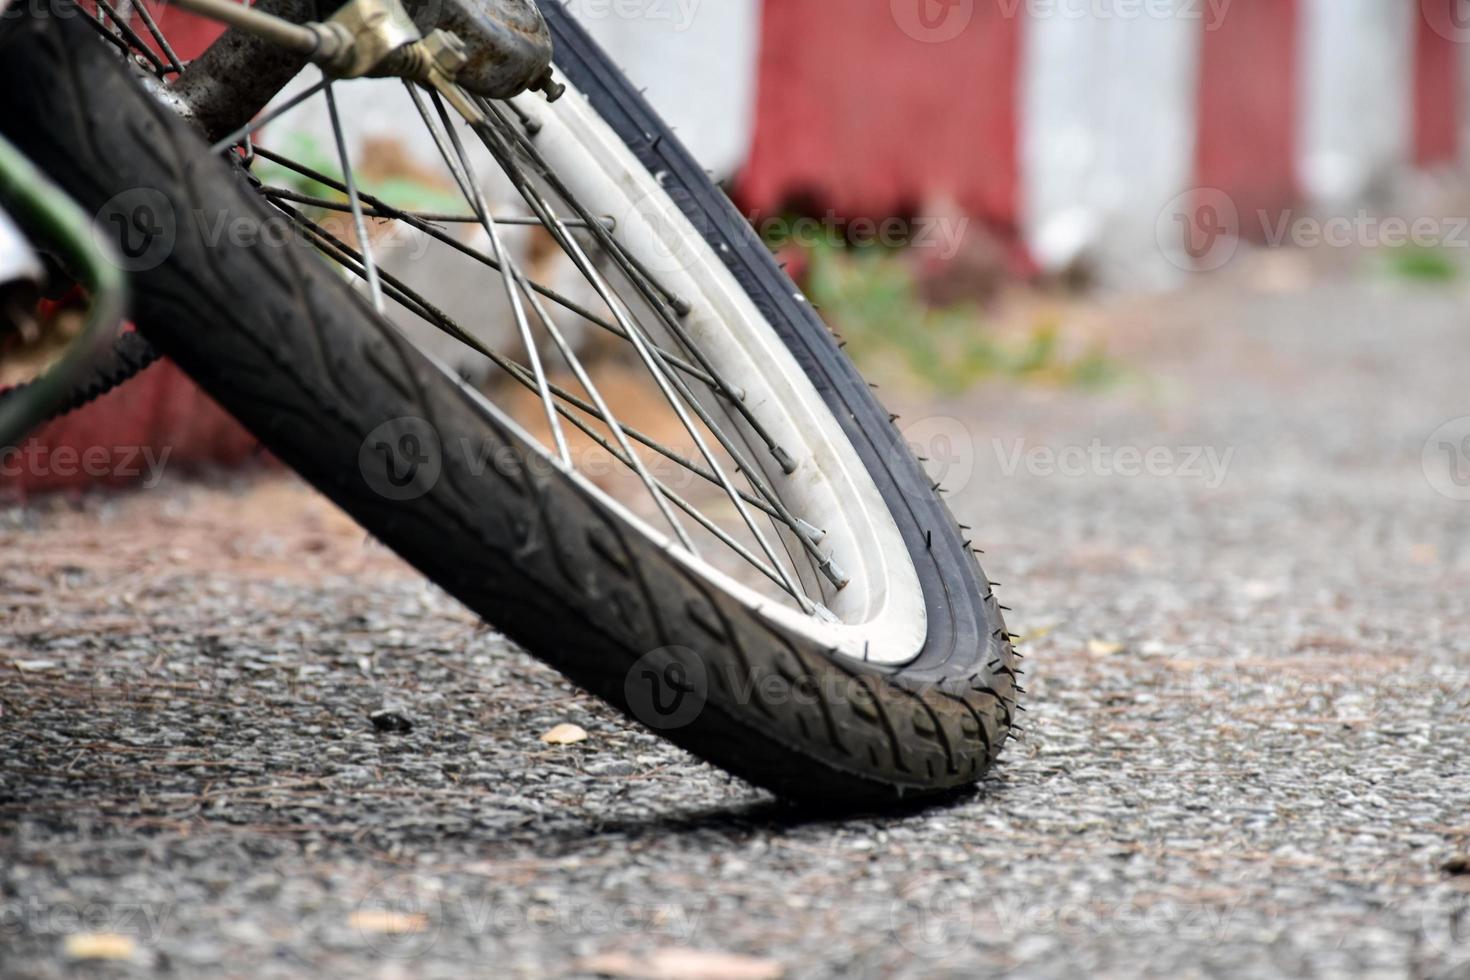 Bike flat tires which parked on red-white line beside the road in the public park, soft and selective focus on tire. photo